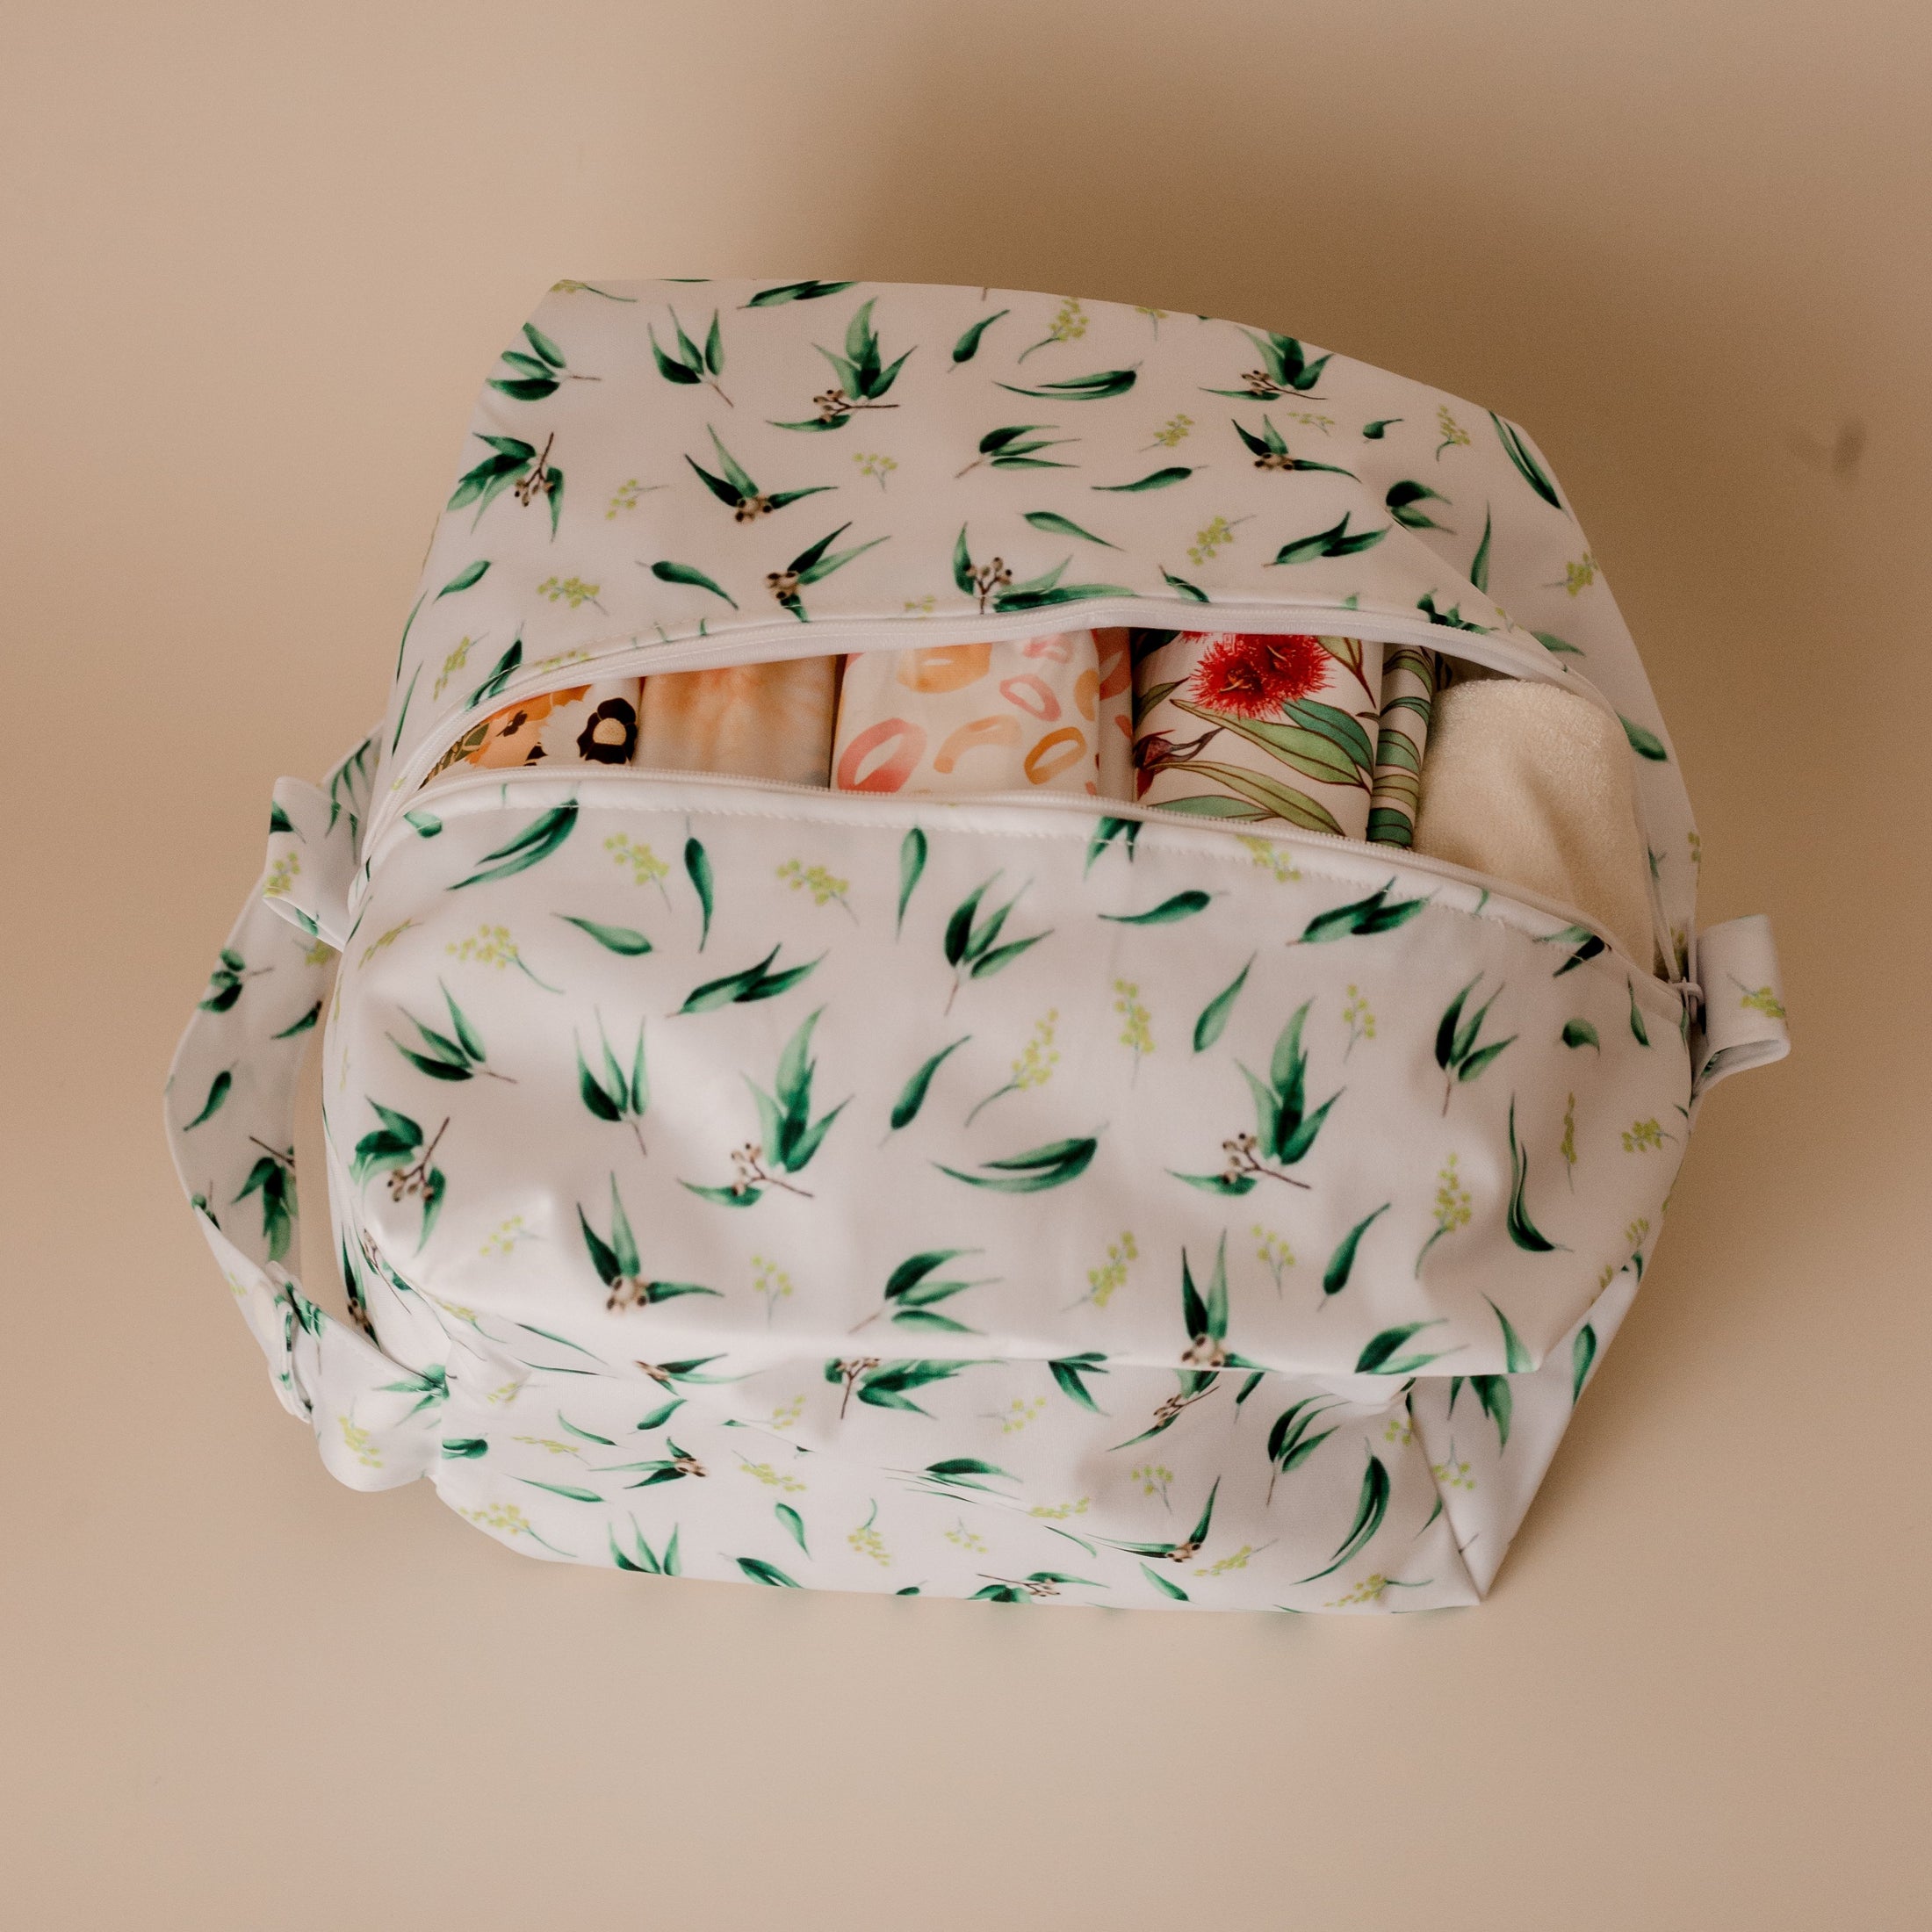 cloth nappy pod. cloth nappies by my little gumnut. reusable nappies. nappy carry bag. cloth nappies australia.